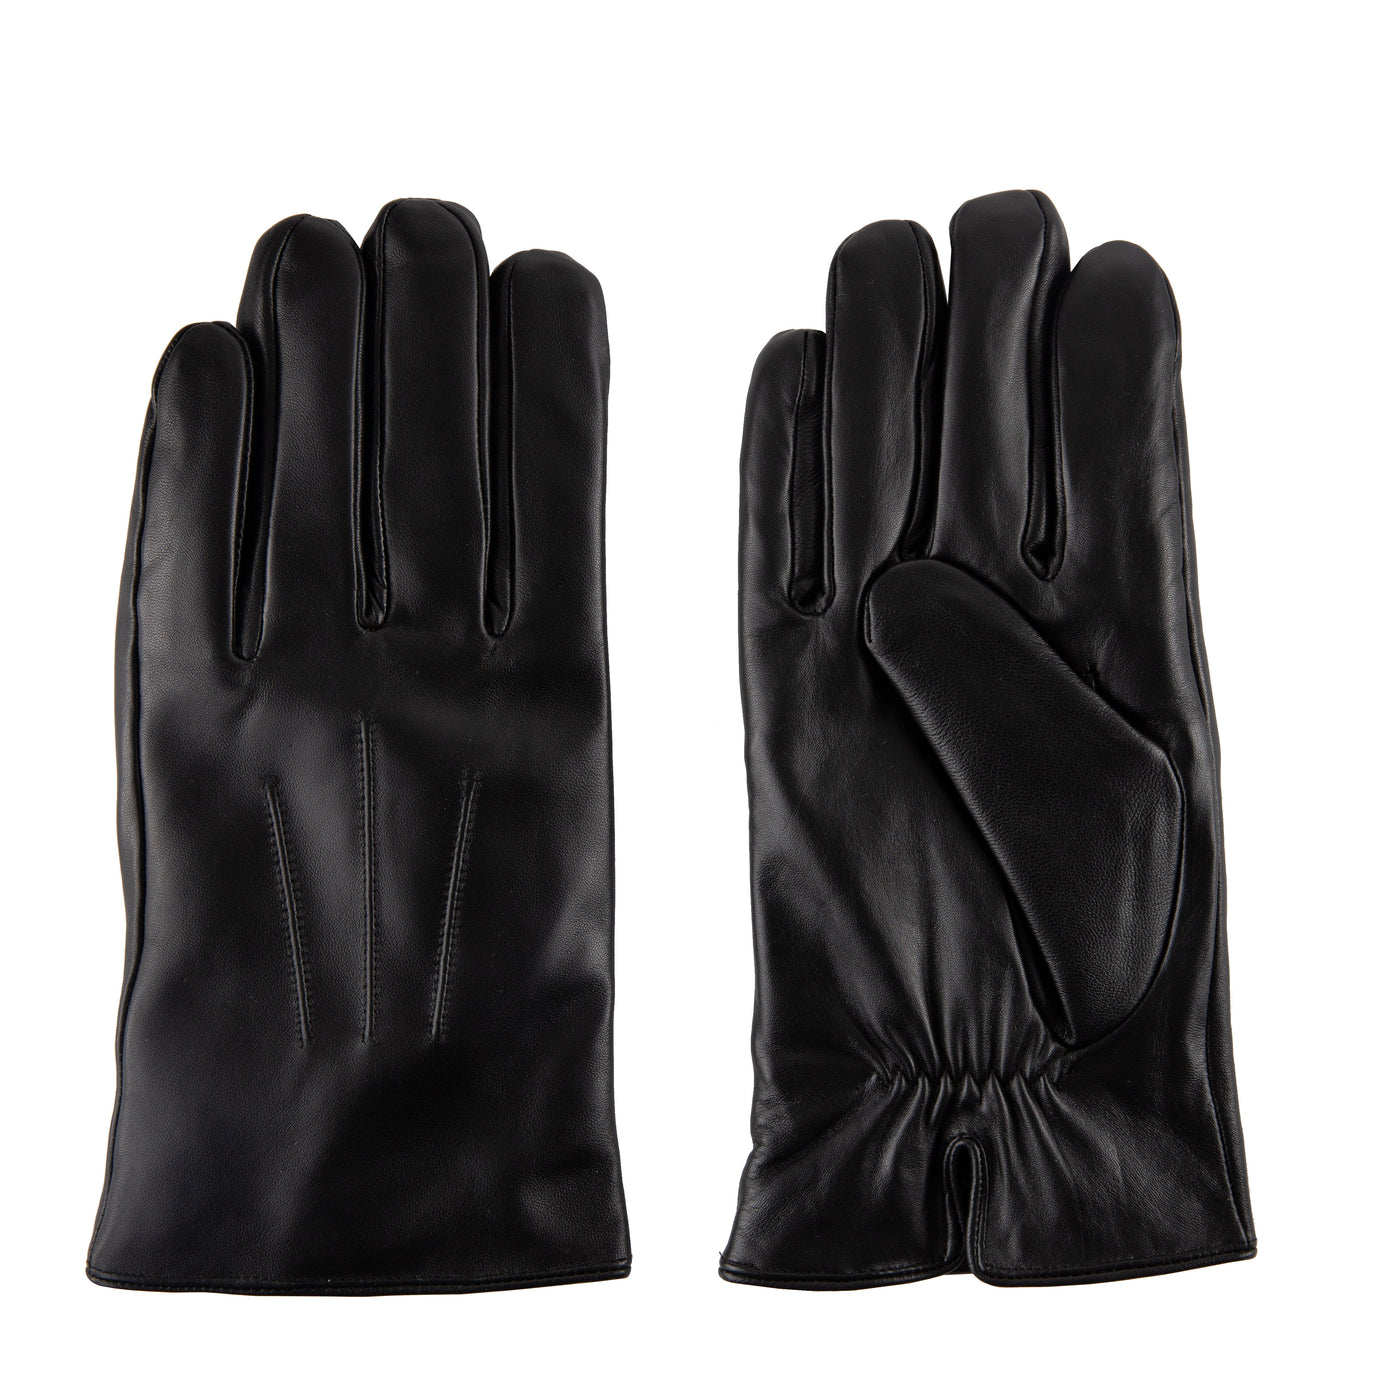 Men's PU-Leather Glove With Faux Fur